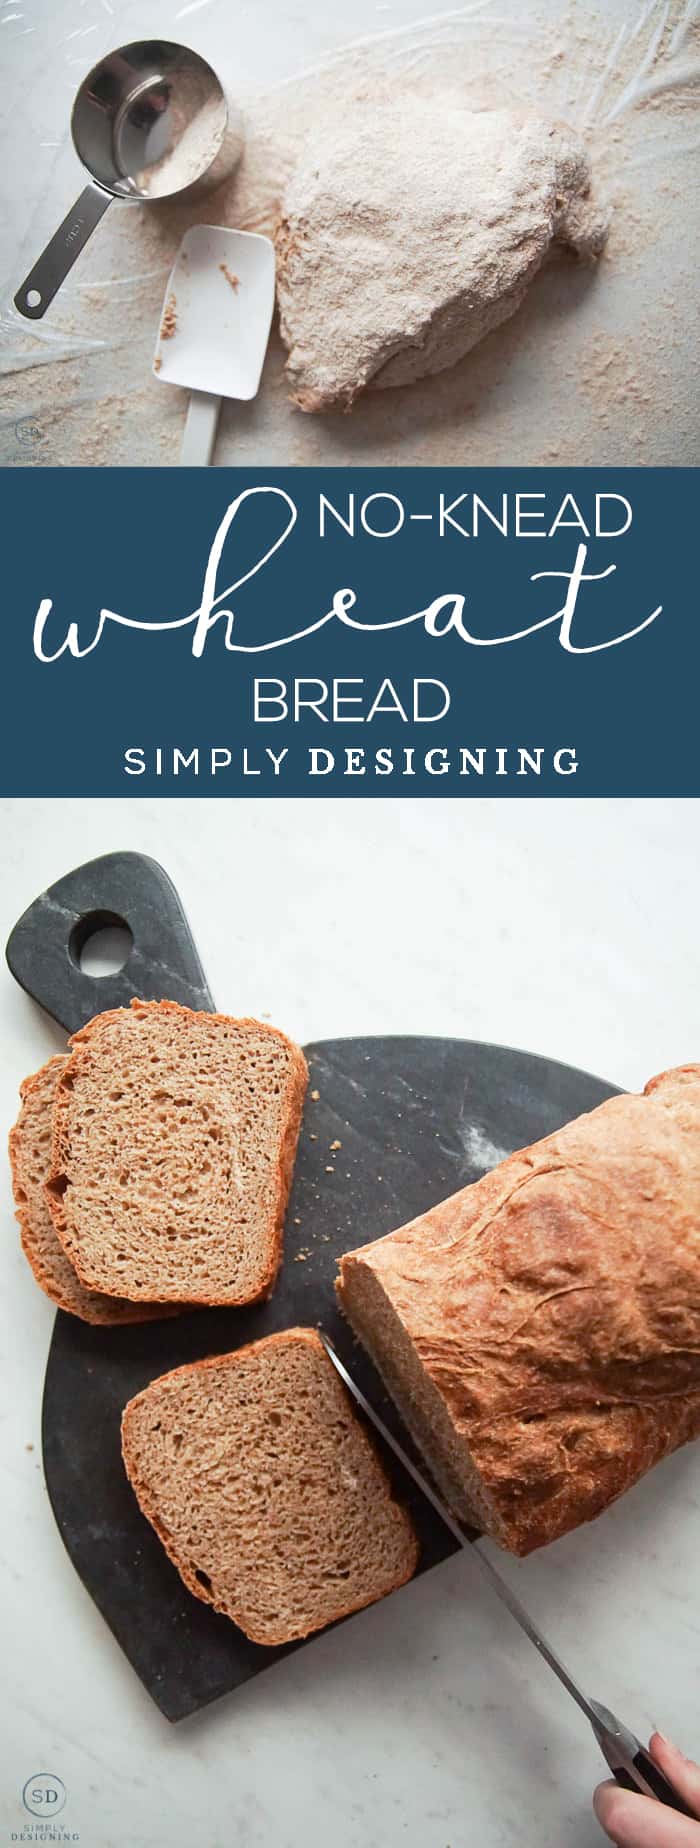 This Whole Wheat No Knead Bread is a fail proof bread recipe that is so simple to make only takes about 5 minutes of hands-on time